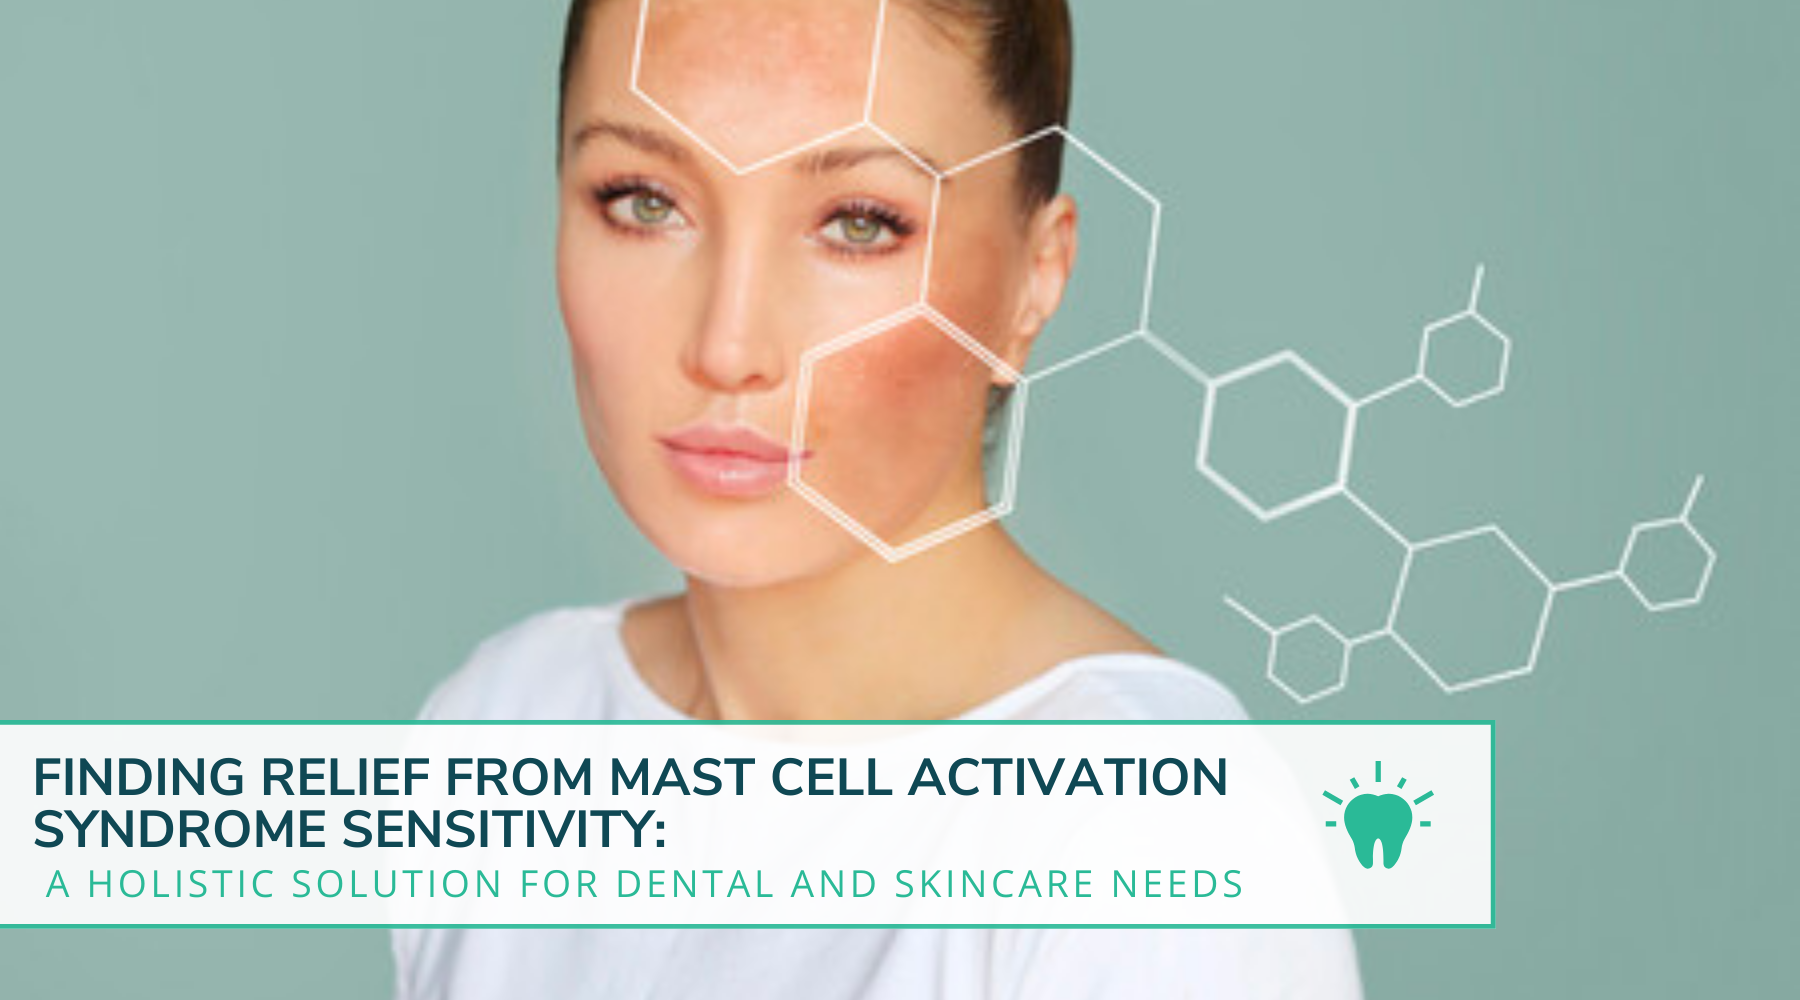 Finding Relief from Mast Cell Activation Syndrome Sensitivity: A Holistic Solution for Dental and Skincare Needs